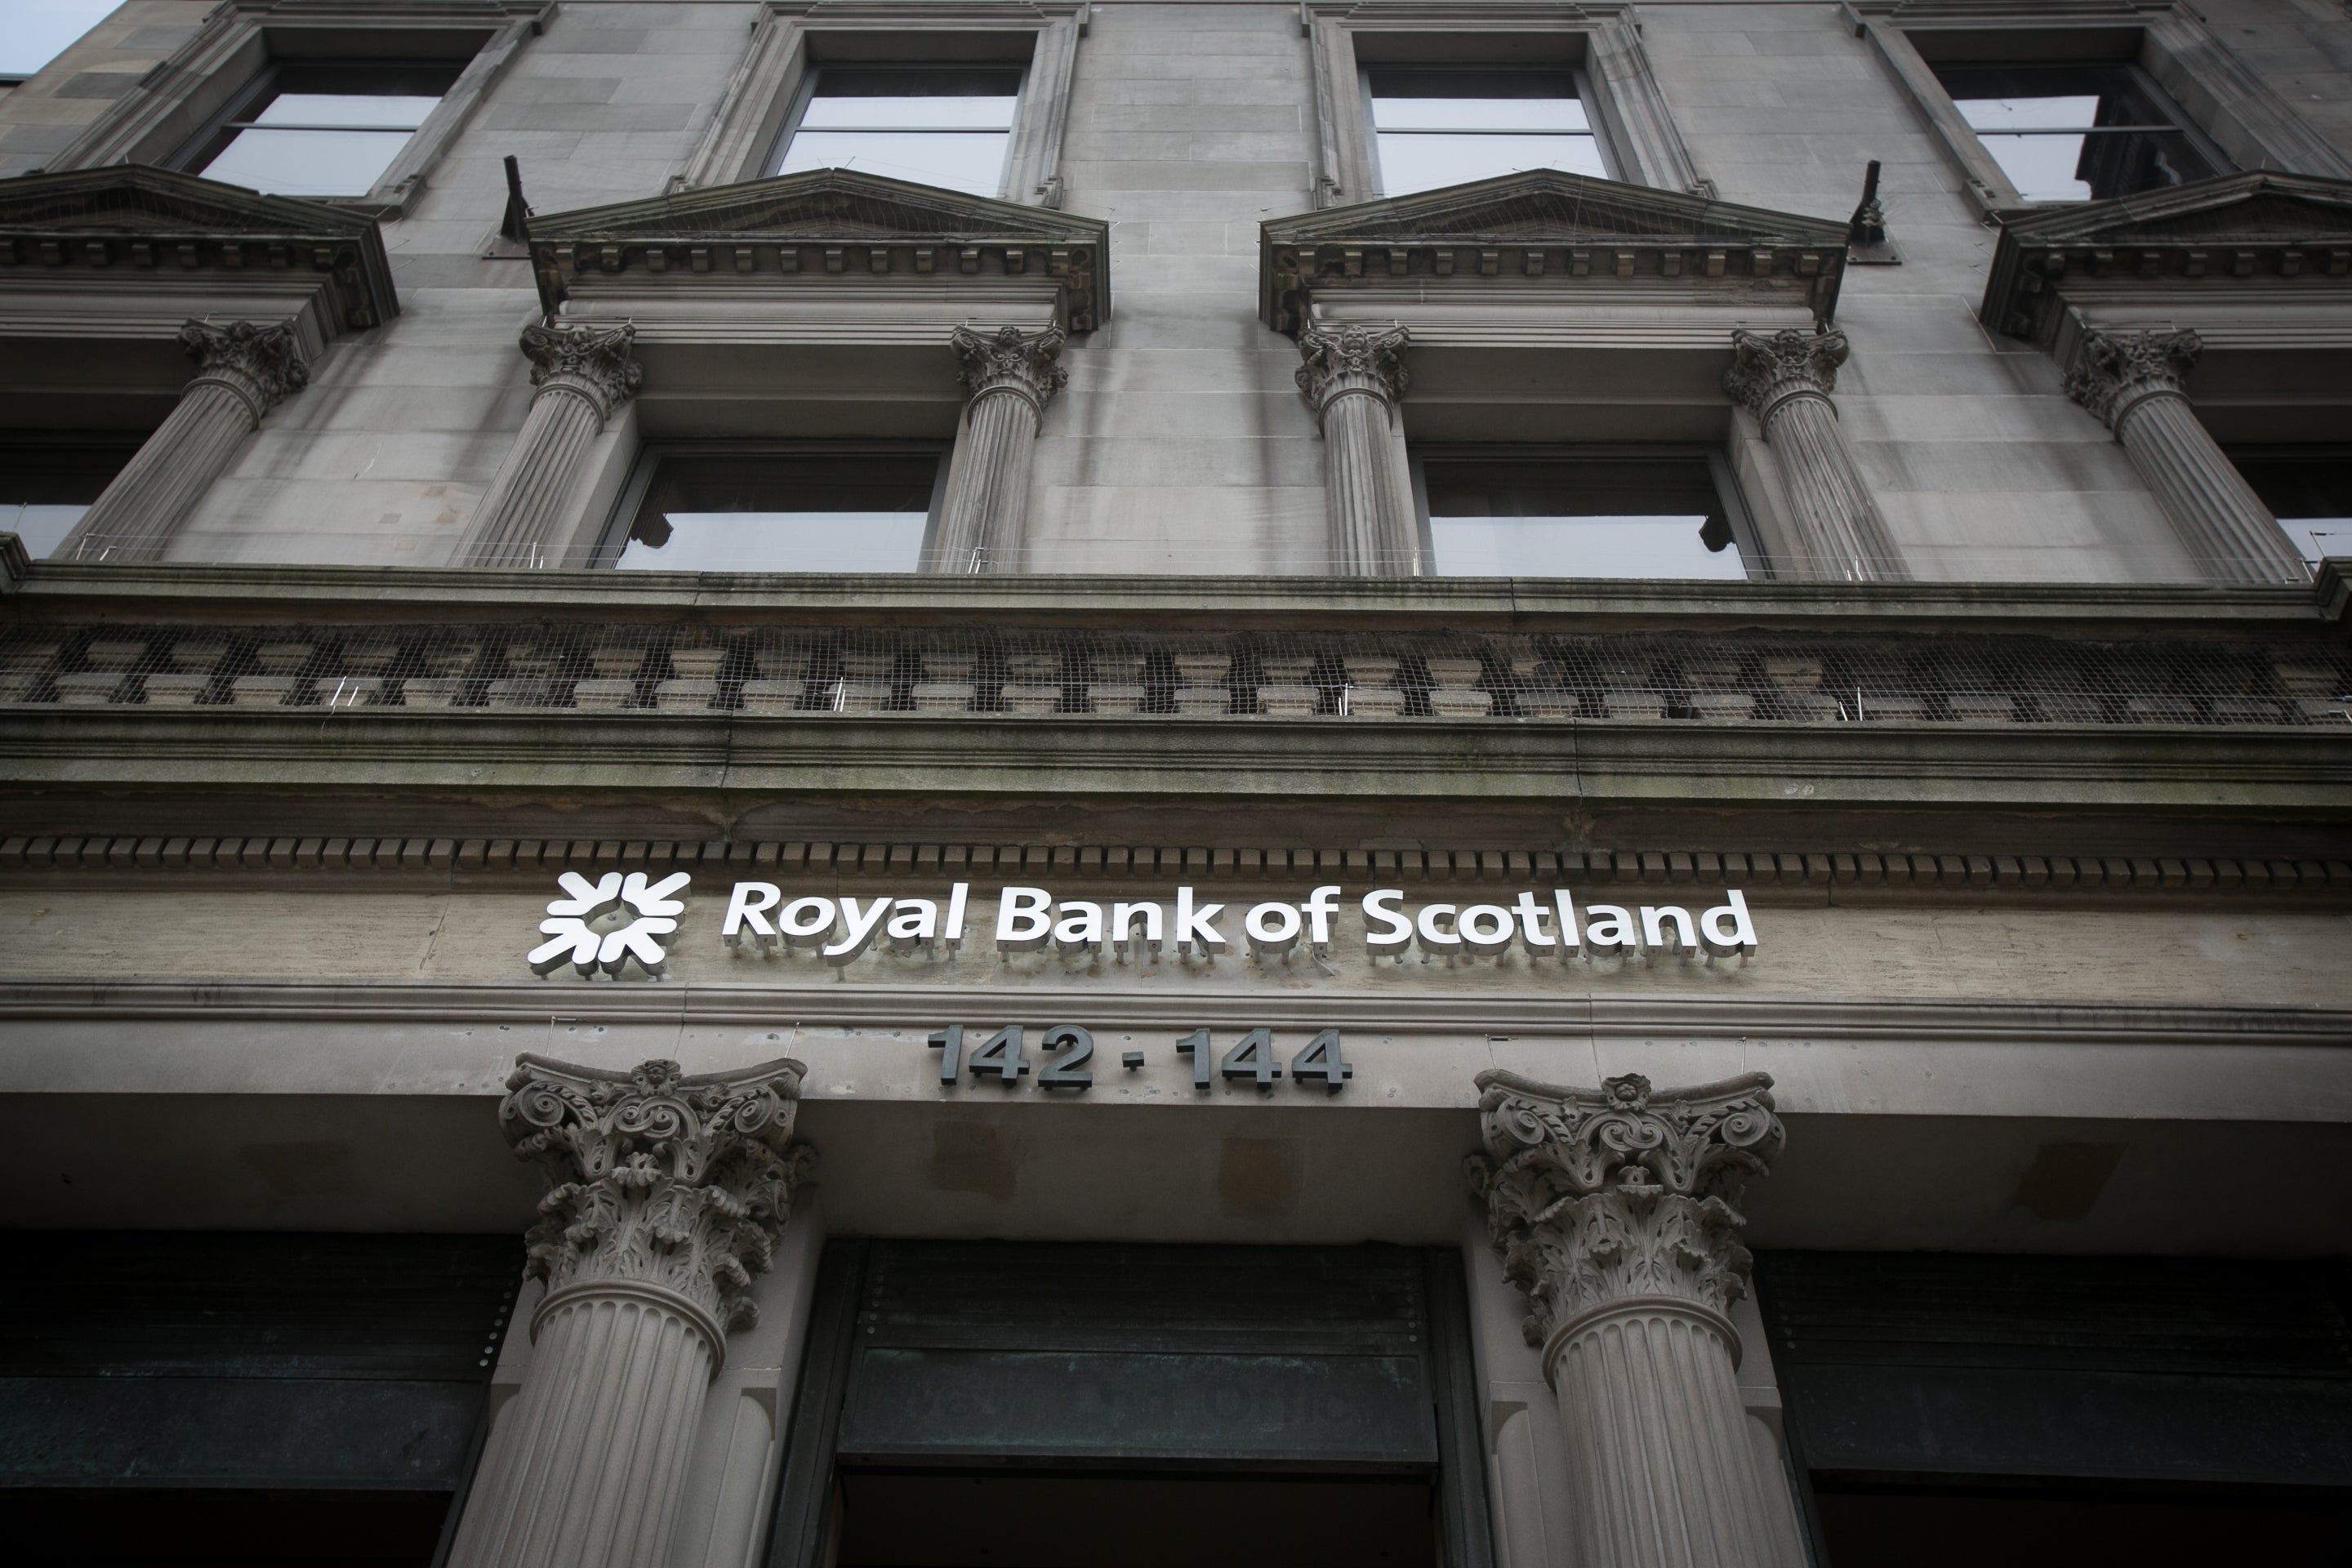 The Royal Bank of Scotland was founded in Edinburgh in 1727